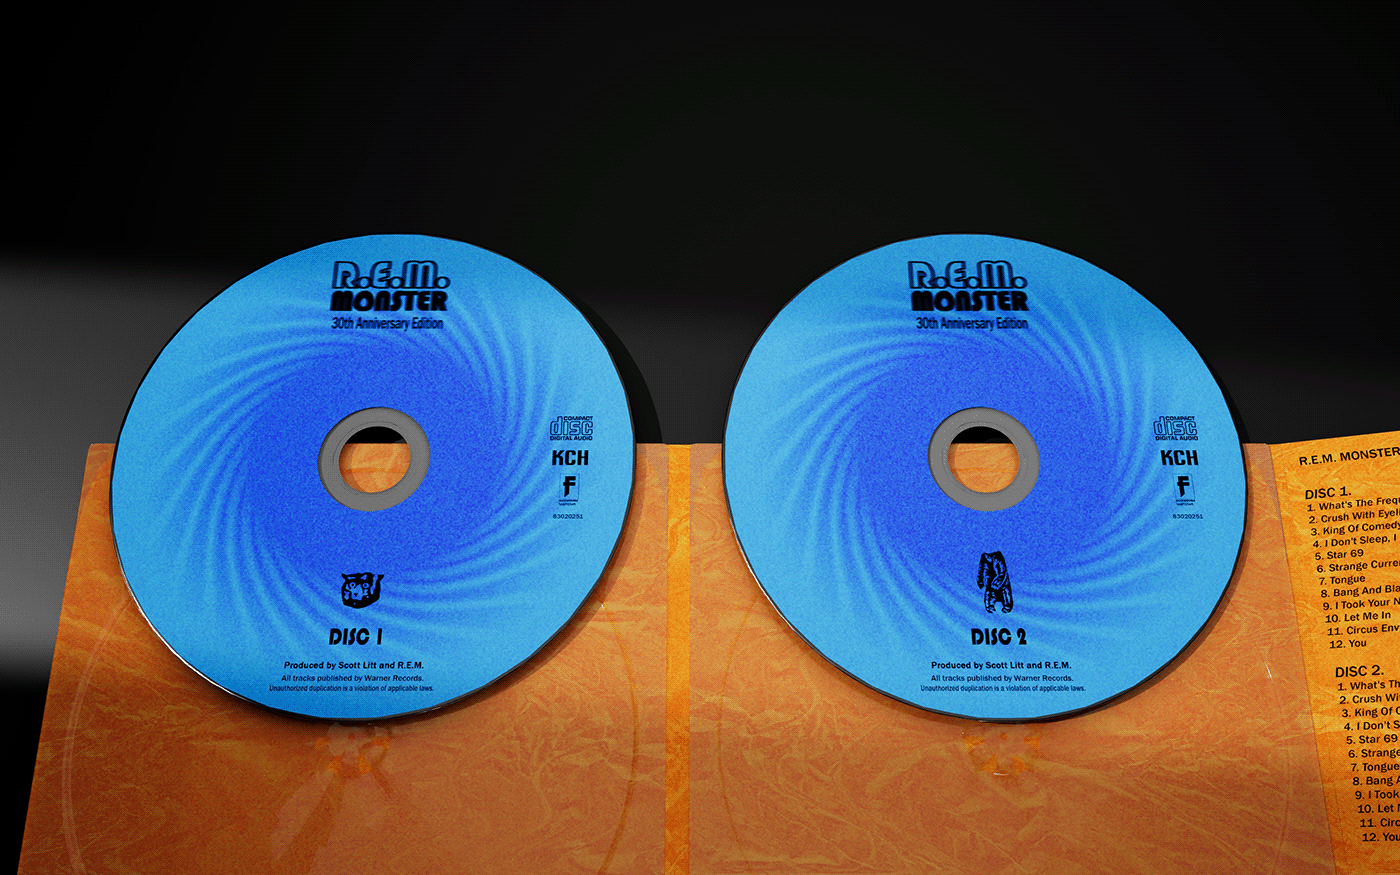 CD cover CD design Packaging Graphic Designer graphic design  3D Photography  photoshop fanmade rock